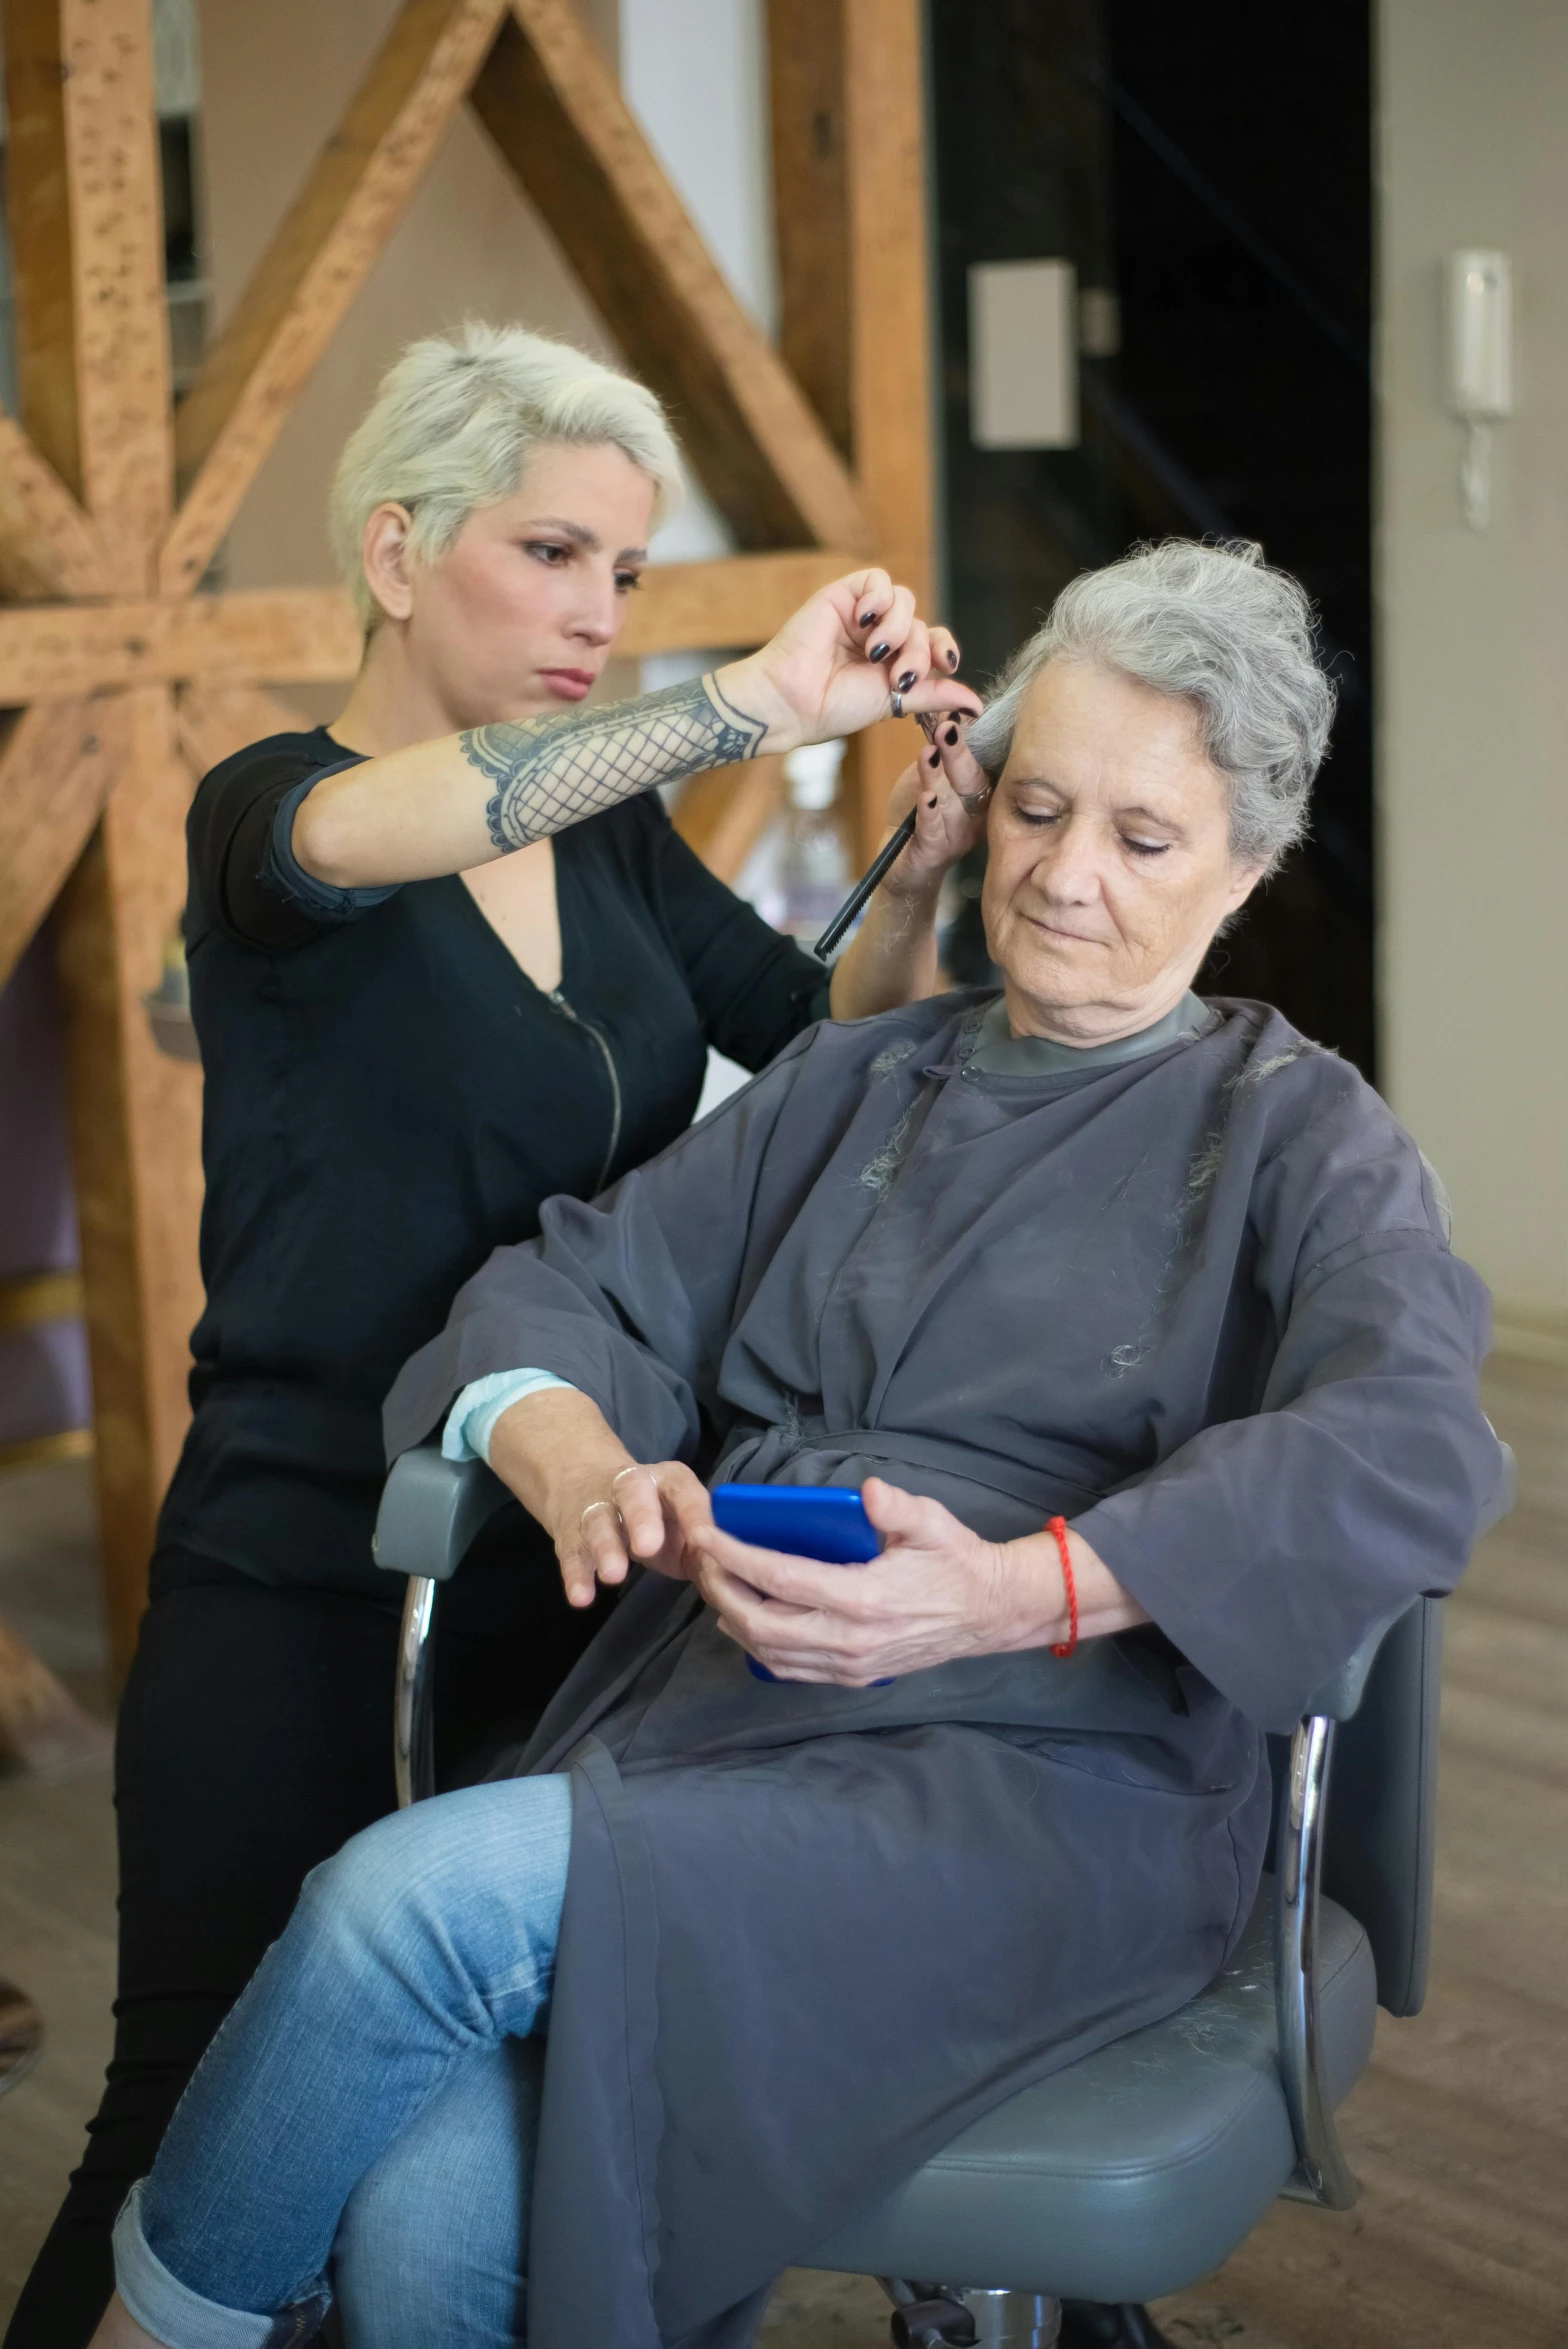 a woman sitting in a chair cutting another woman's hair, short grey hair, ready to model, uploaded, aging